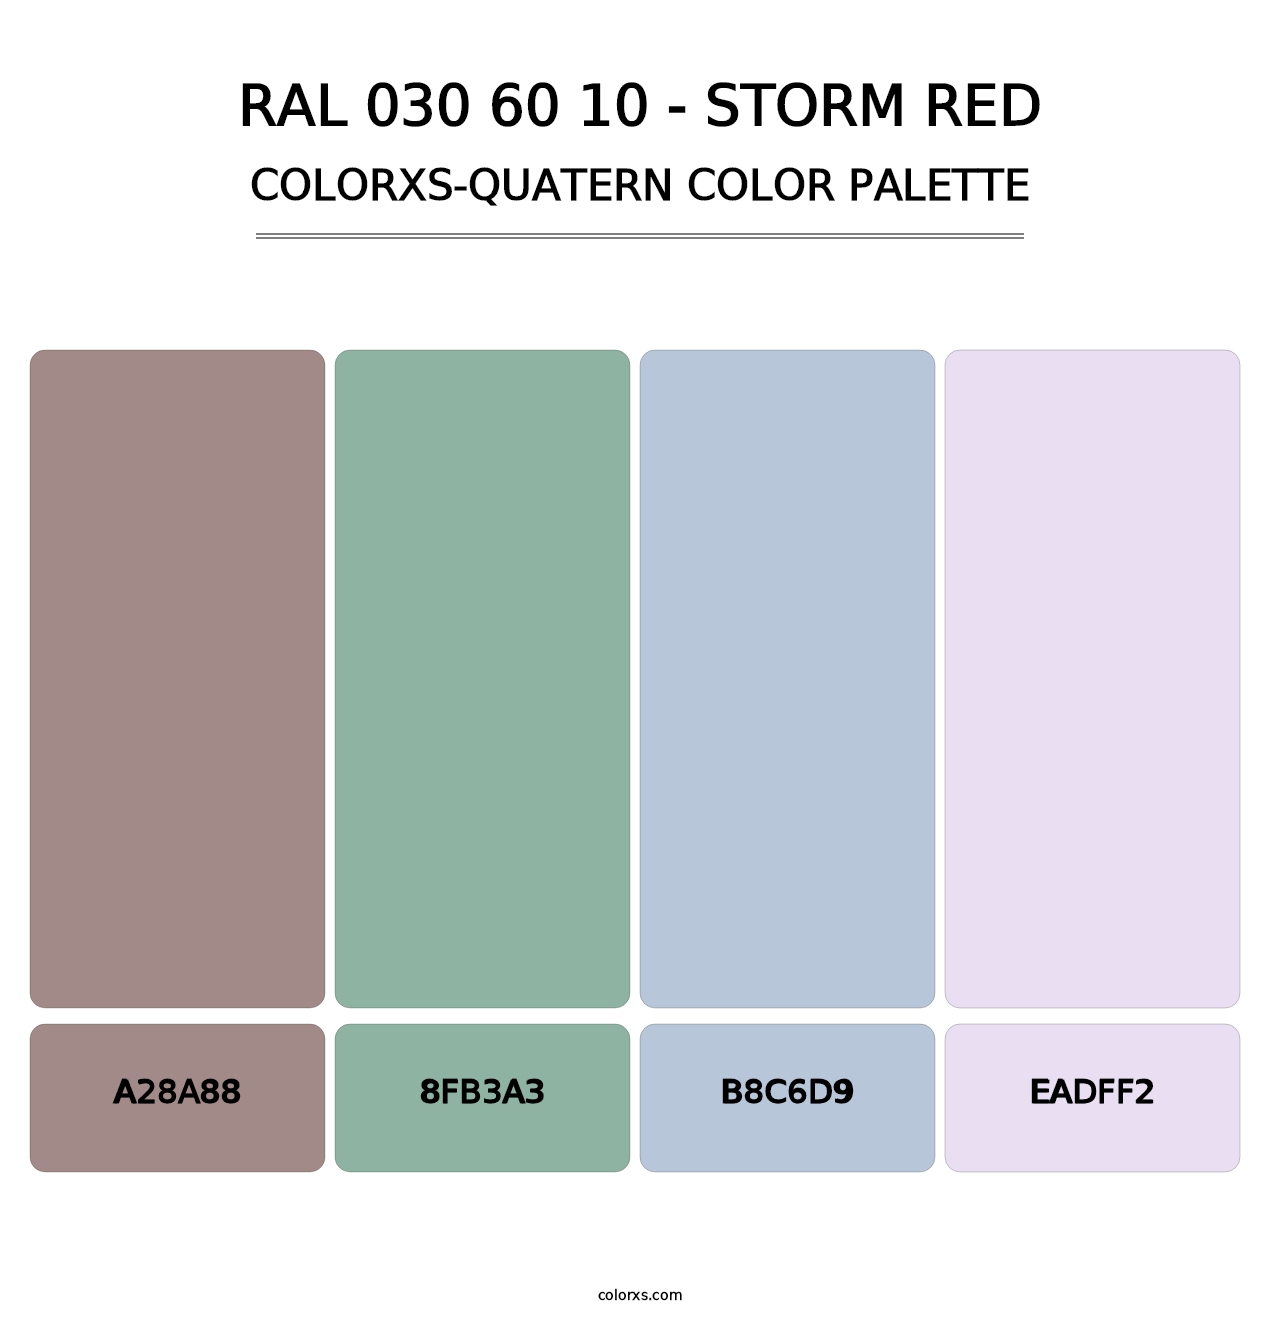 RAL 030 60 10 - Storm Red - Colorxs Quatern Palette